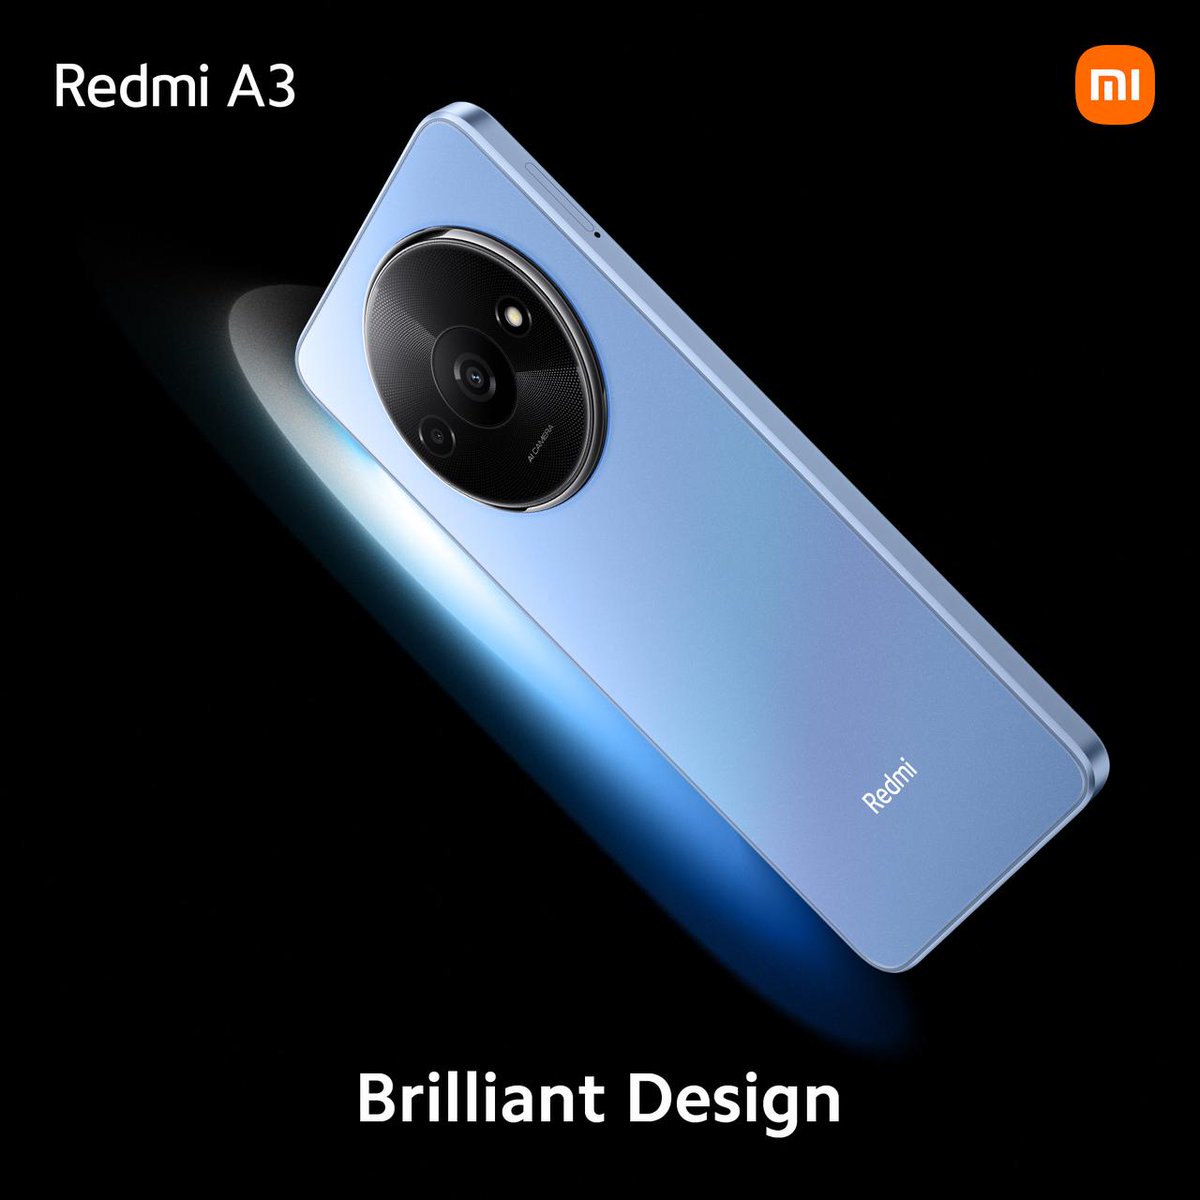 Redmi A3 is all about that premium design, delivering a perfect blend of style and functionality. #RedmiA3